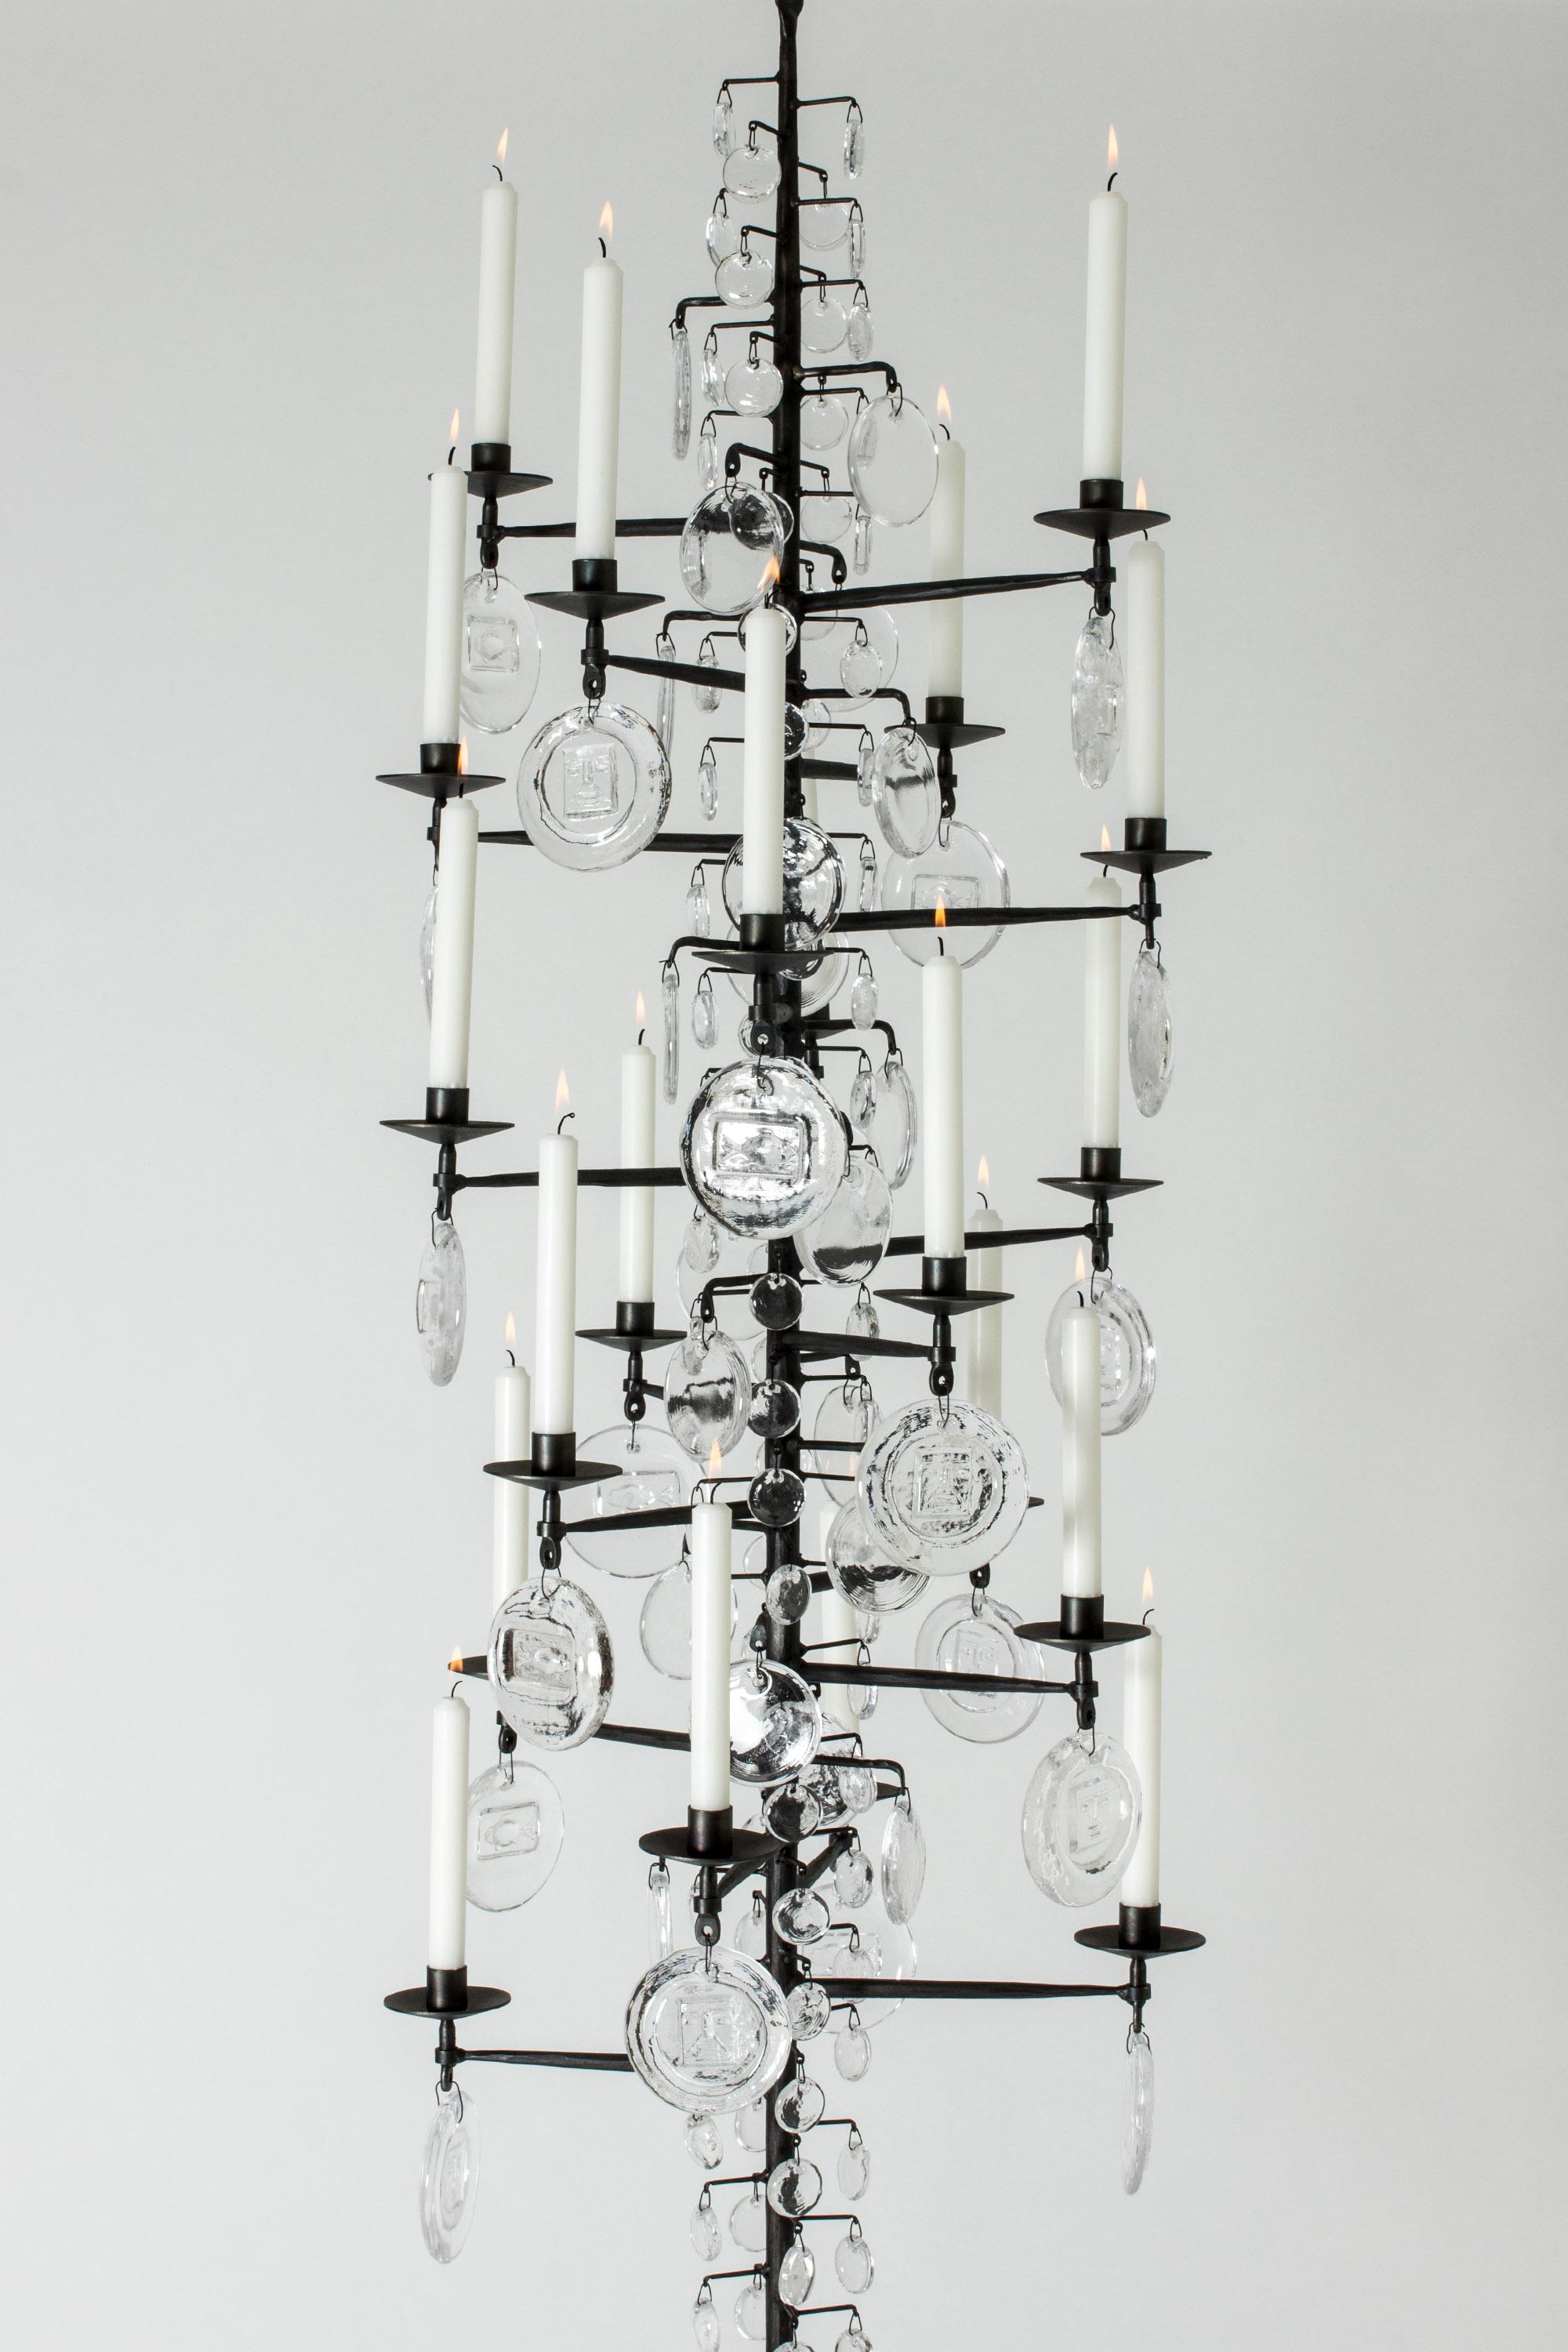 Stunning, oversized candle chandelier by Erik Höglund, made from wrought iron and glass. The long, rustic iron frame is adorned with different sized glass medallions that look like large rain drops on a bare tree. The biggest medallions are embossed